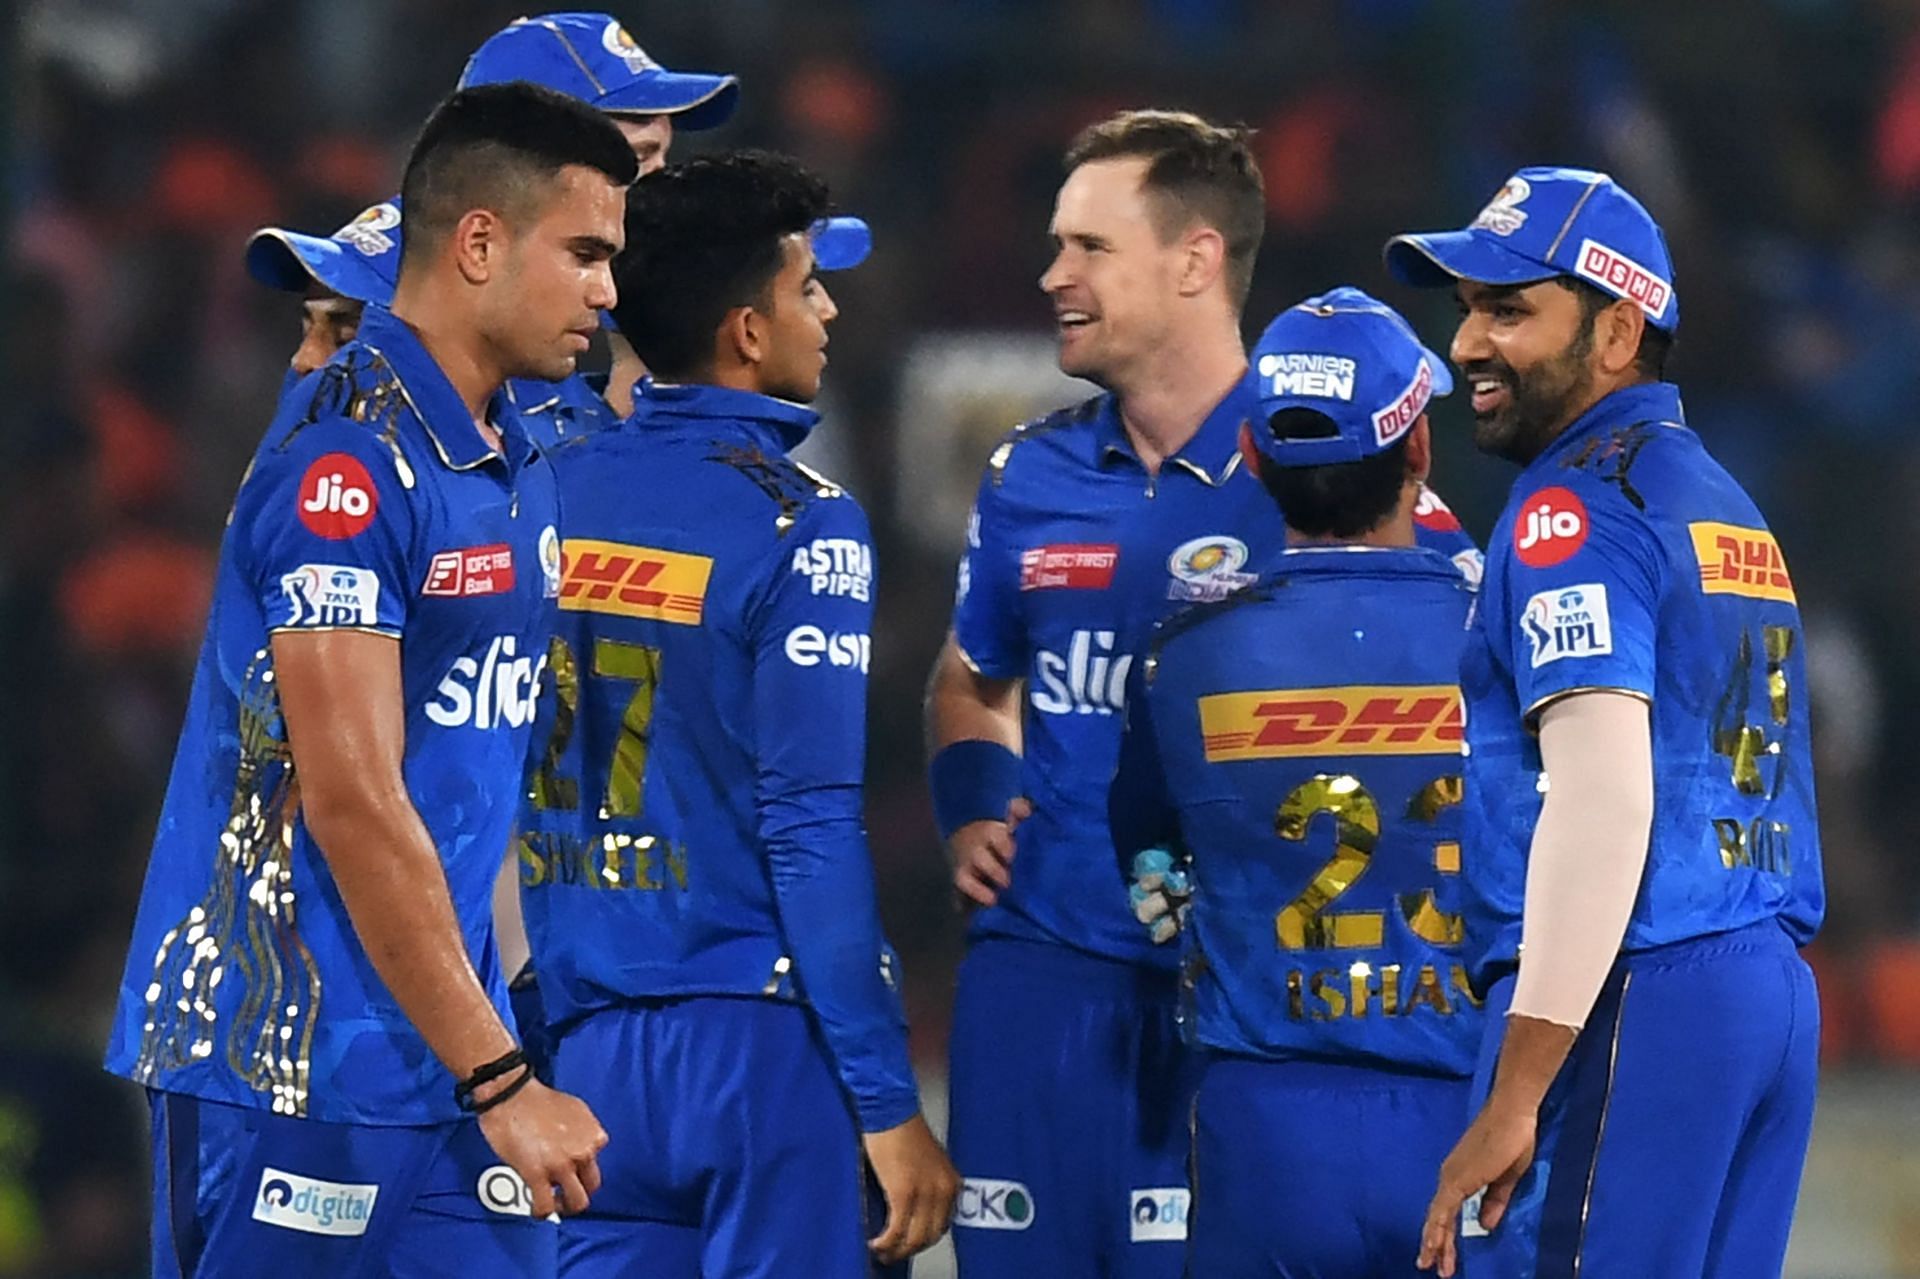 Mumbai Indians have found form in their last few matches